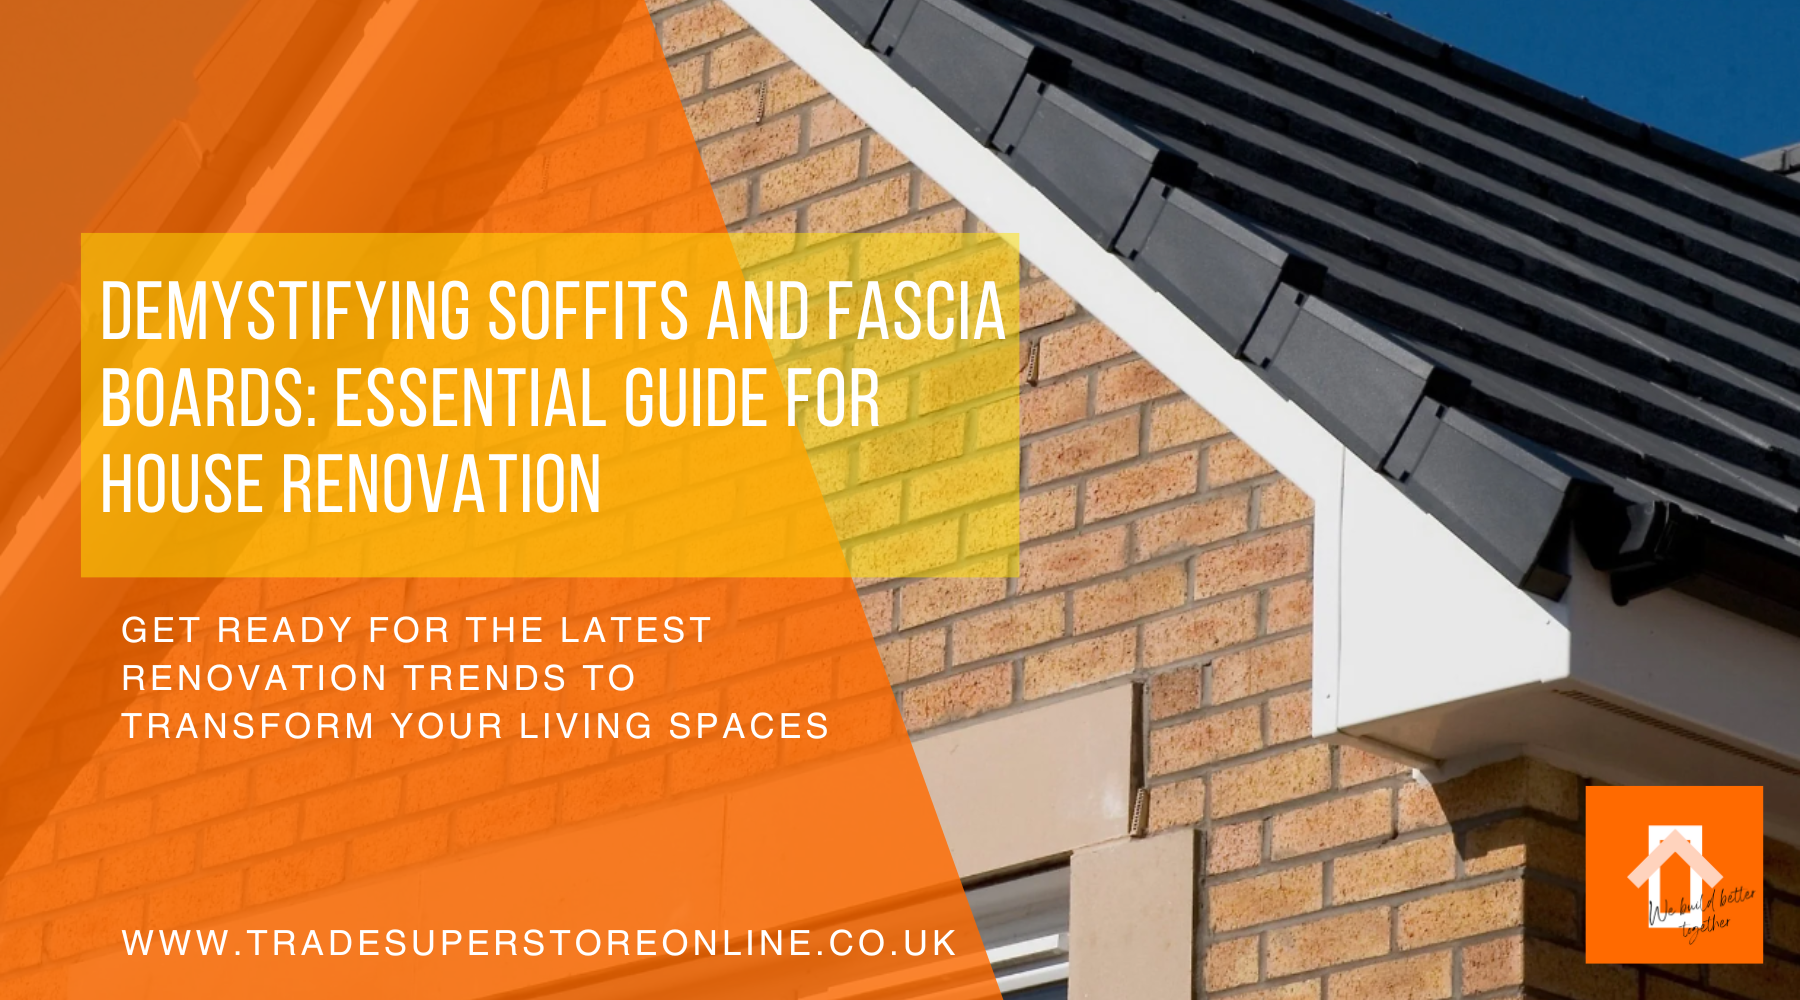 Demystifying Soffits and Fascia Boards: Essential Guide for House Renovation